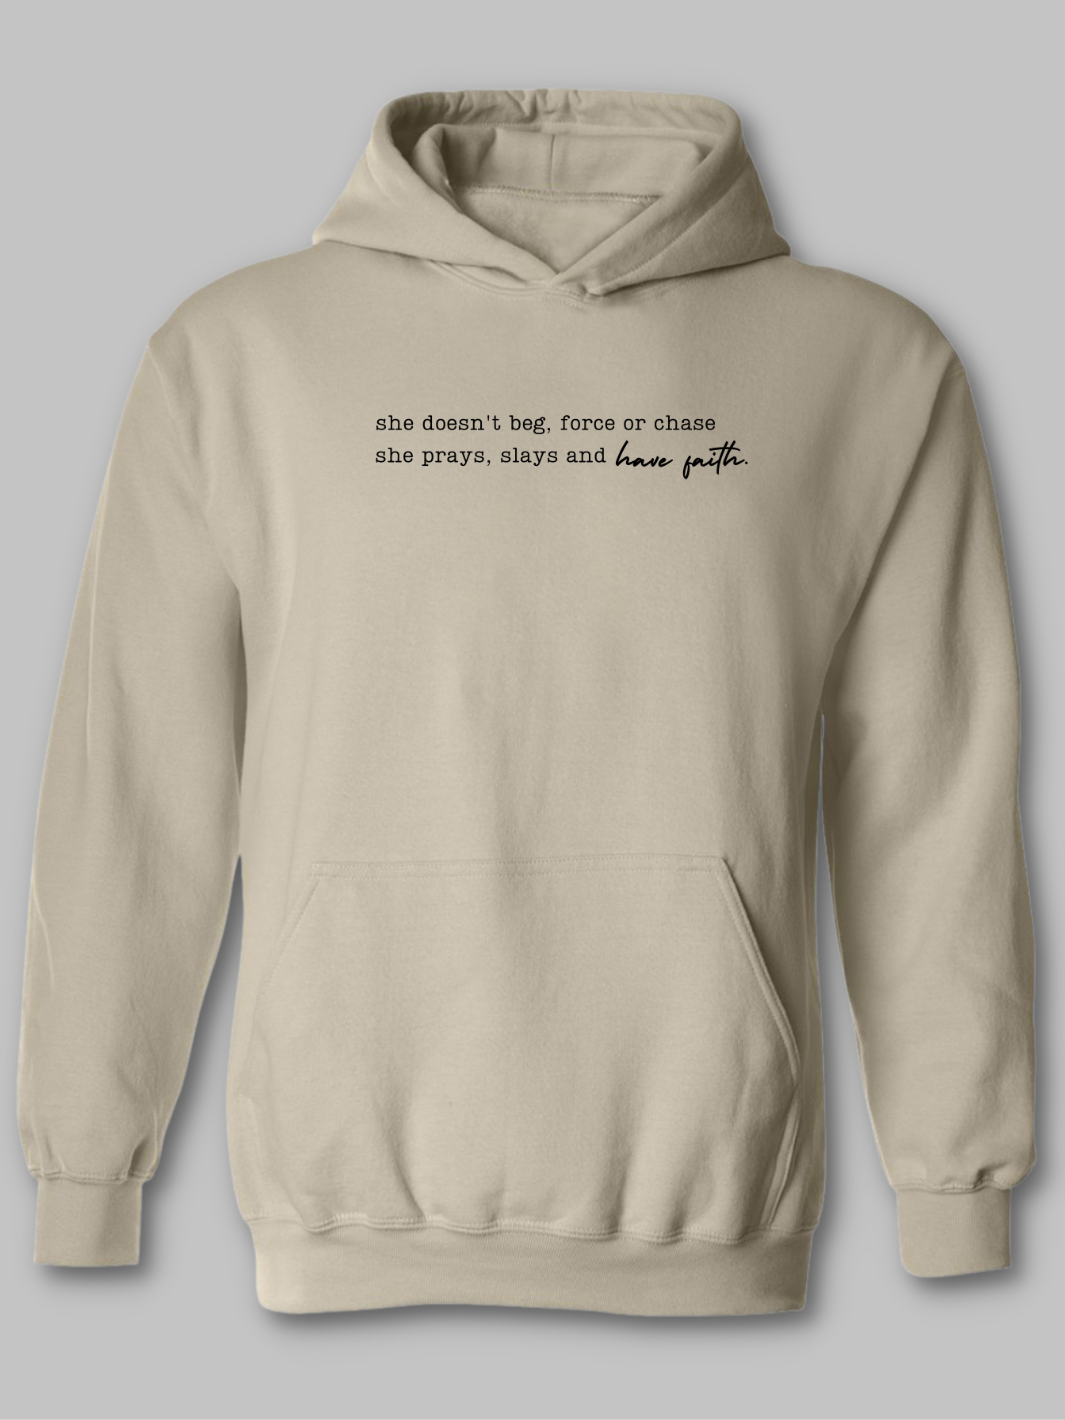 Image of a  Tan, sand, Khaki christian based hoodie  featuring the inspirational phrase 'Don't Chase, Have Faith' prominently displayed on the front. The text is styled in black bold and script font  contrasting against the hoodie  neutral colored hoodie background. The design conveys a message of patience and trust in God. Faith Based hoodie